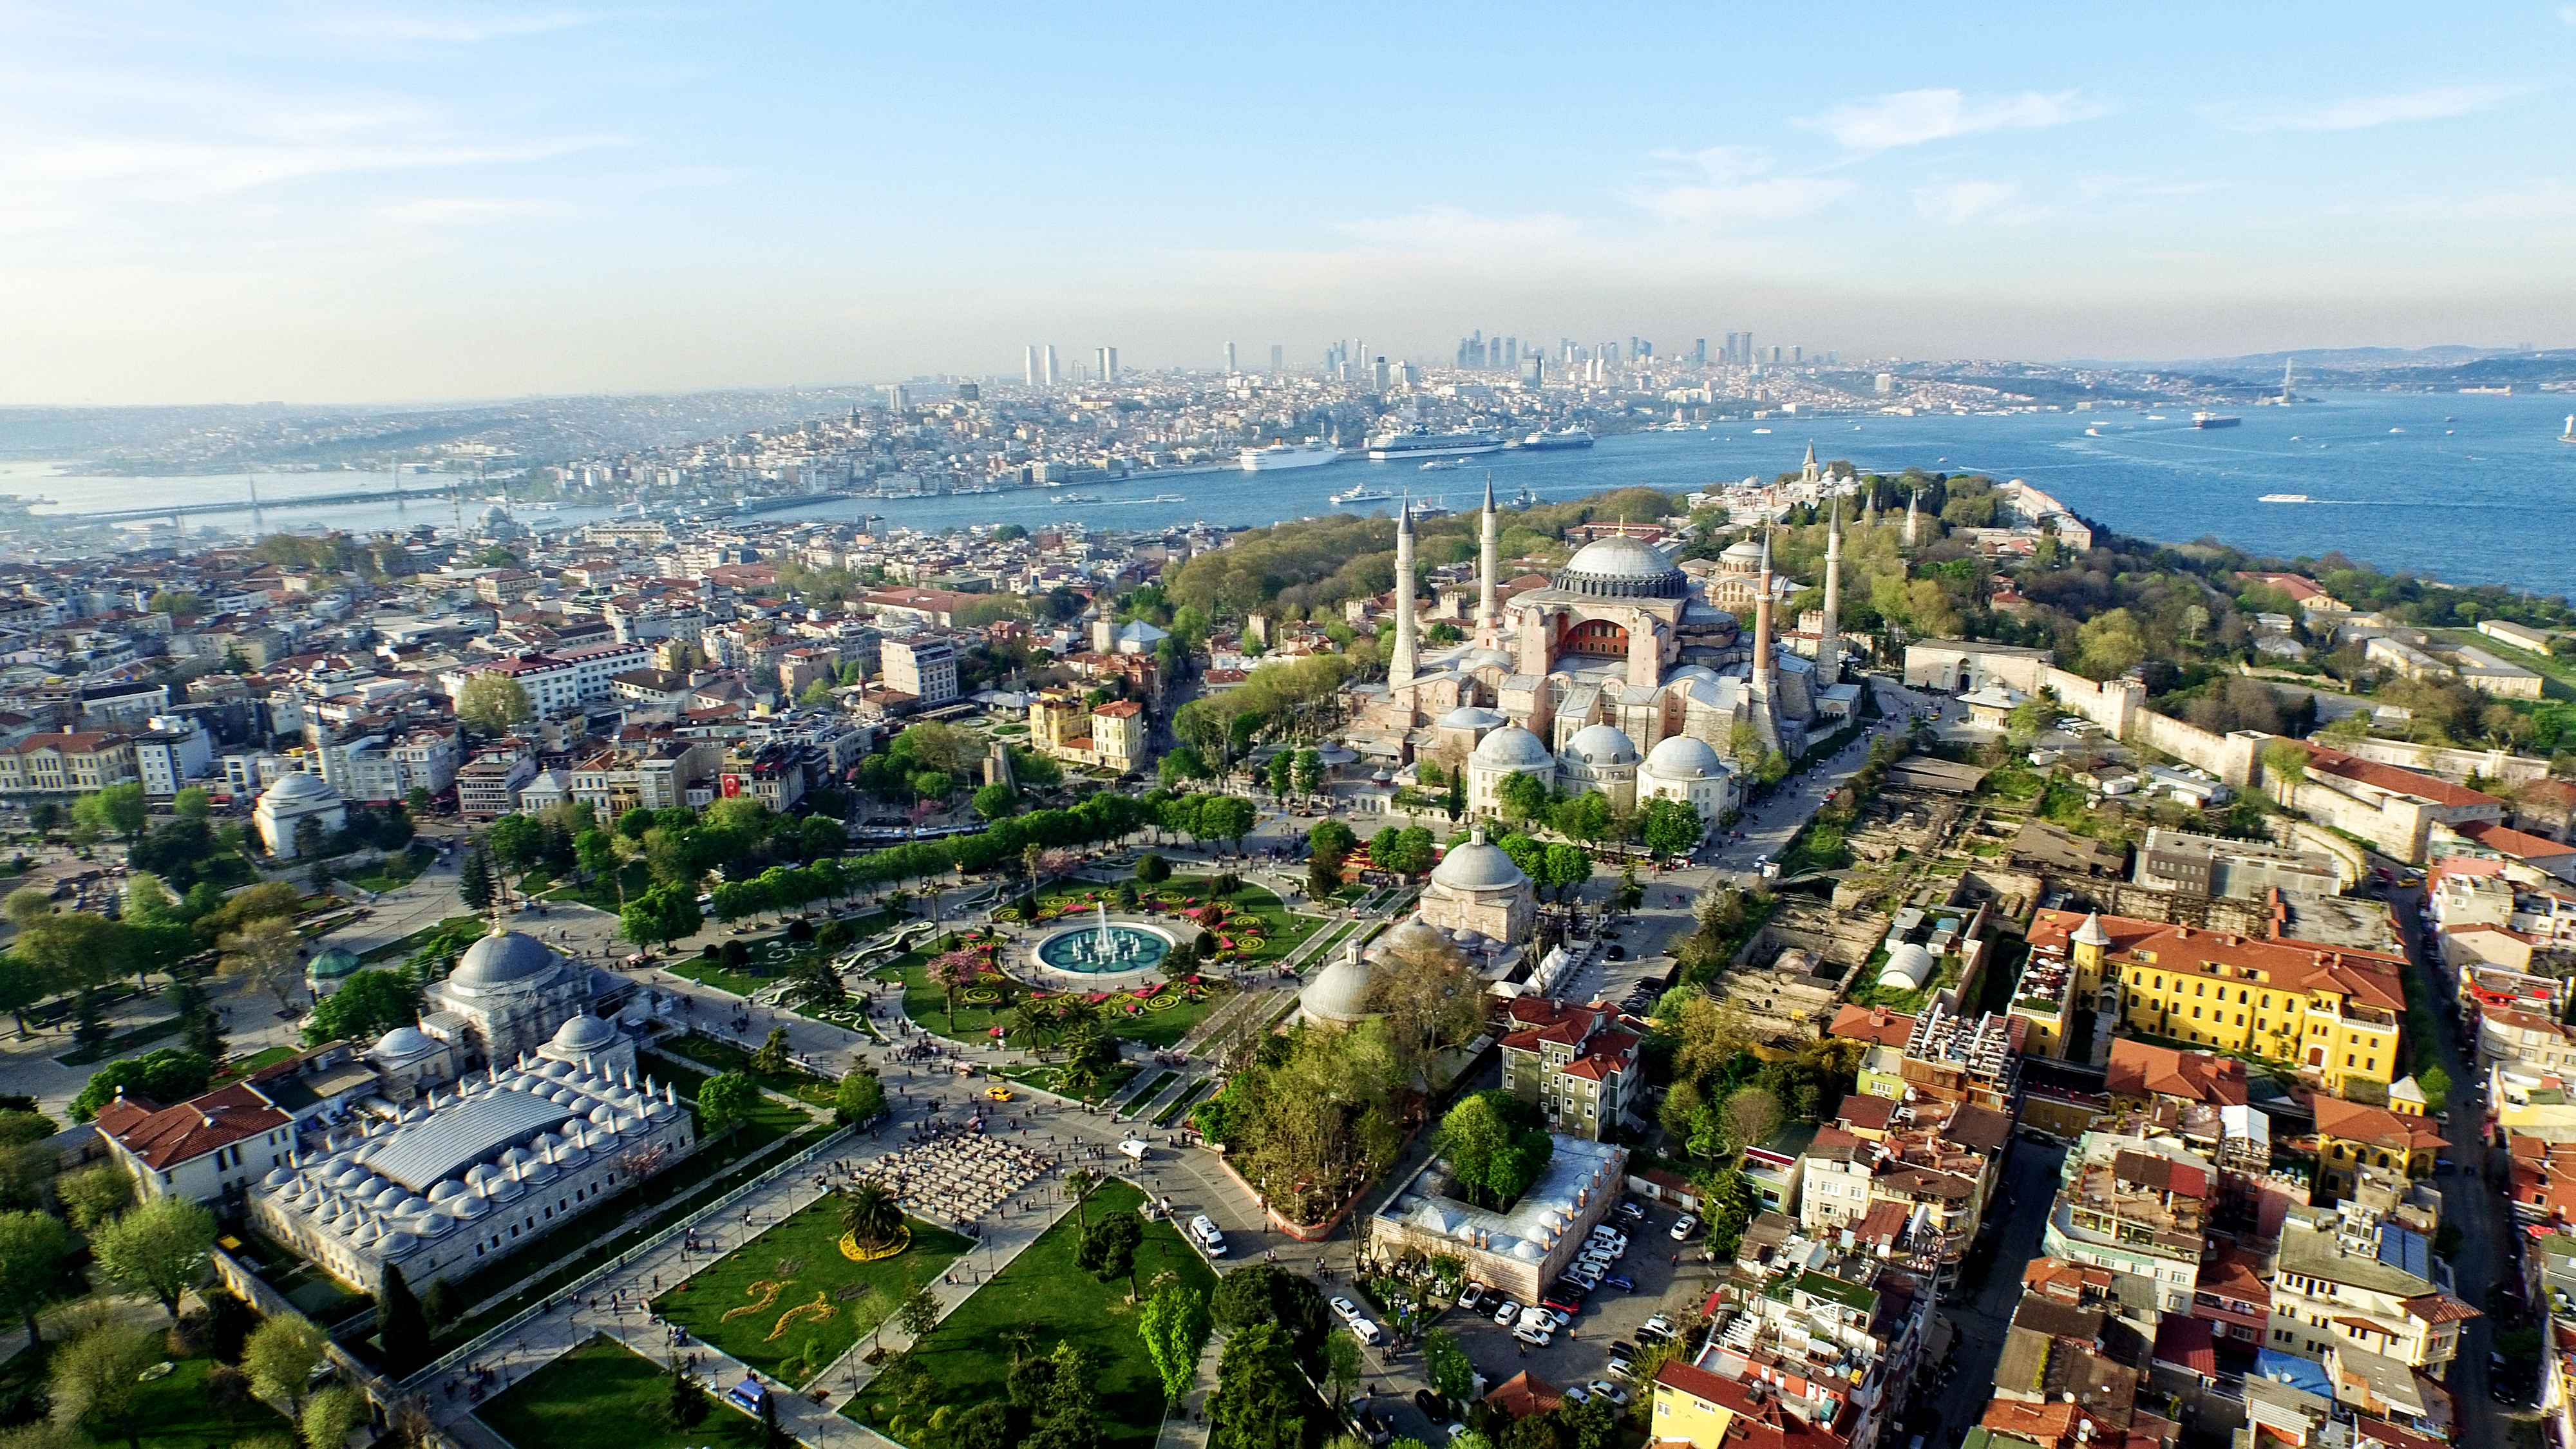 Istanbul is receiving an influx of leisure travelers